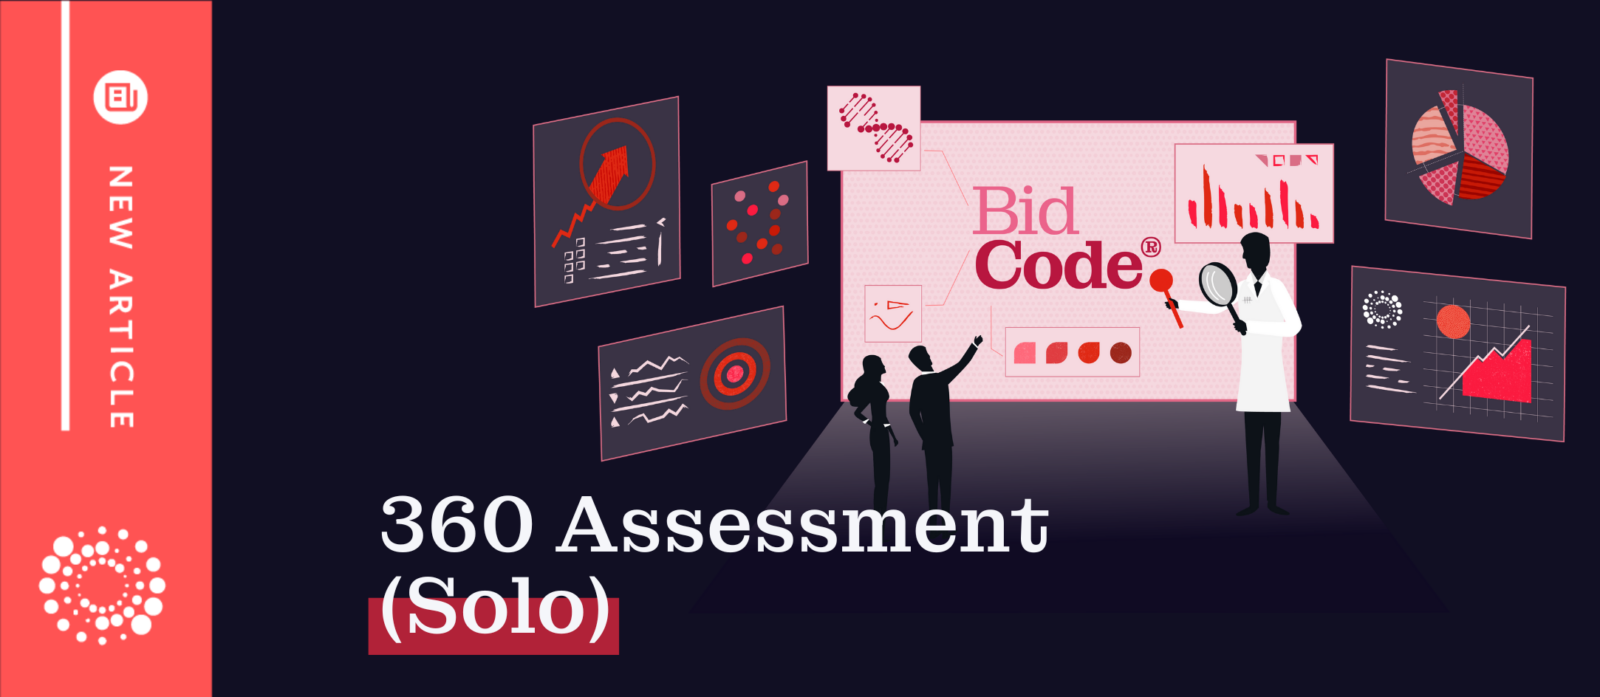 Graphic for BidCode 360 Assessment (Solo)